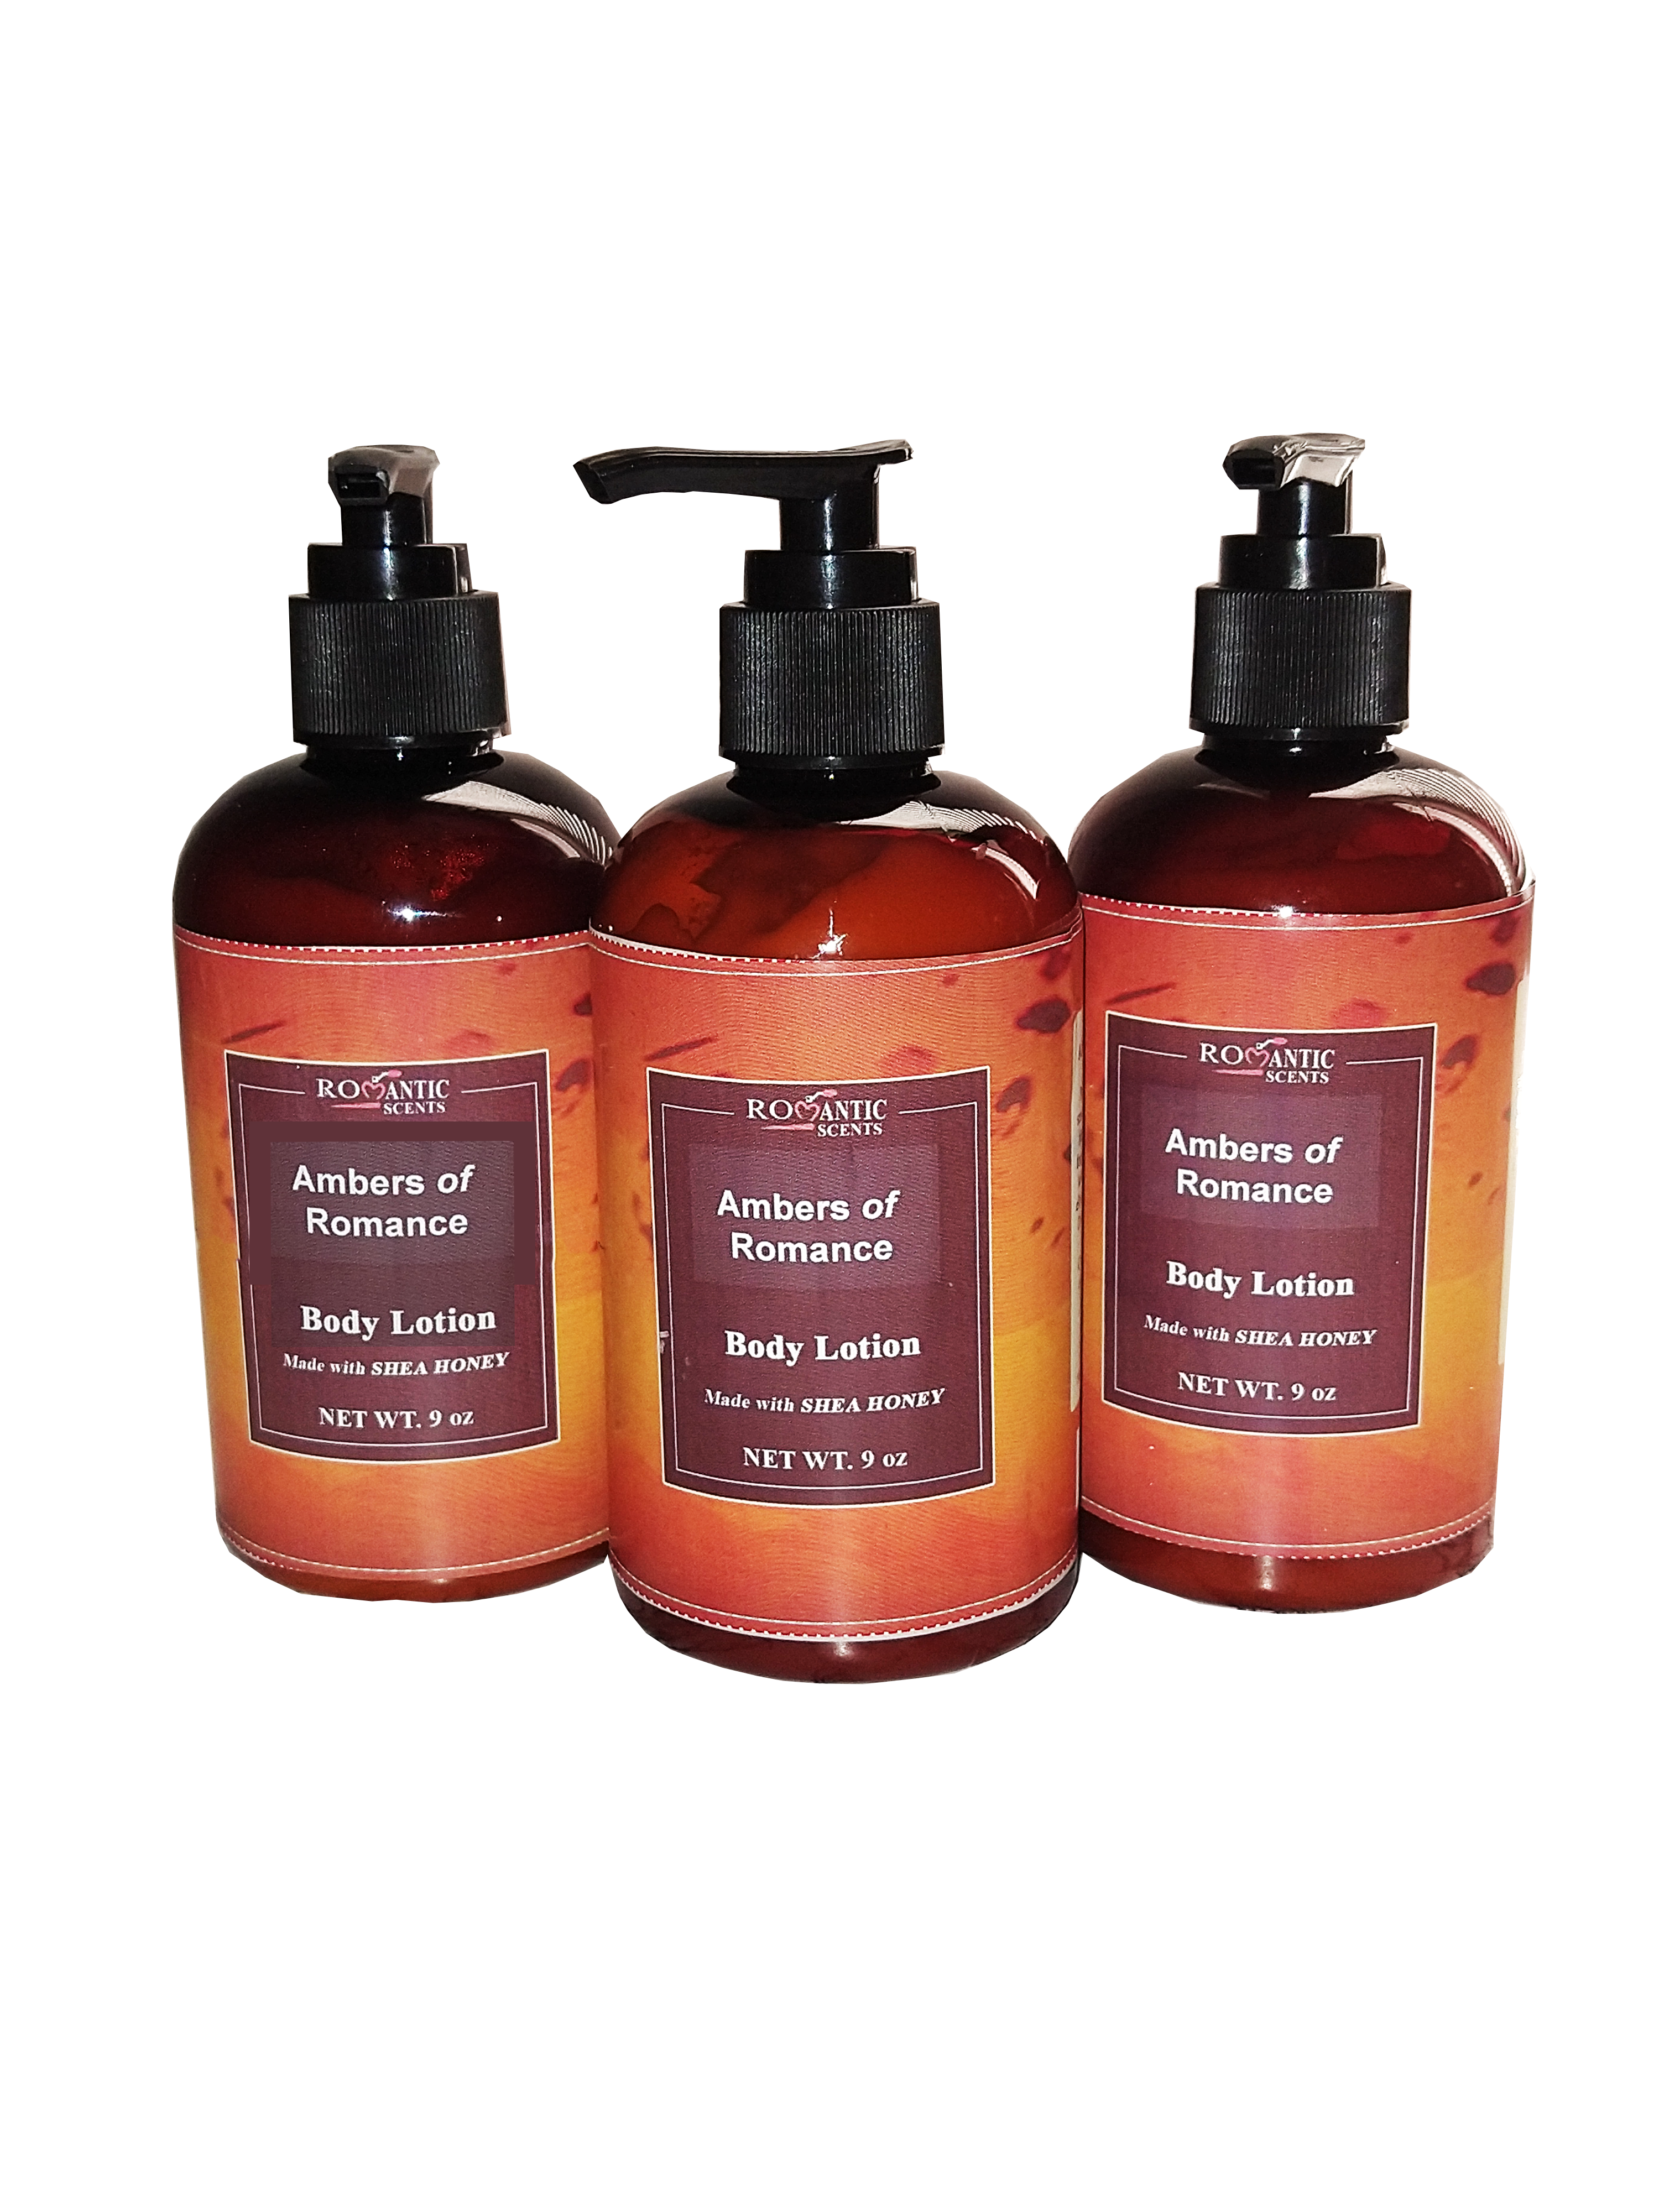 Ambers of Romance Body Lotion Romantic Scents